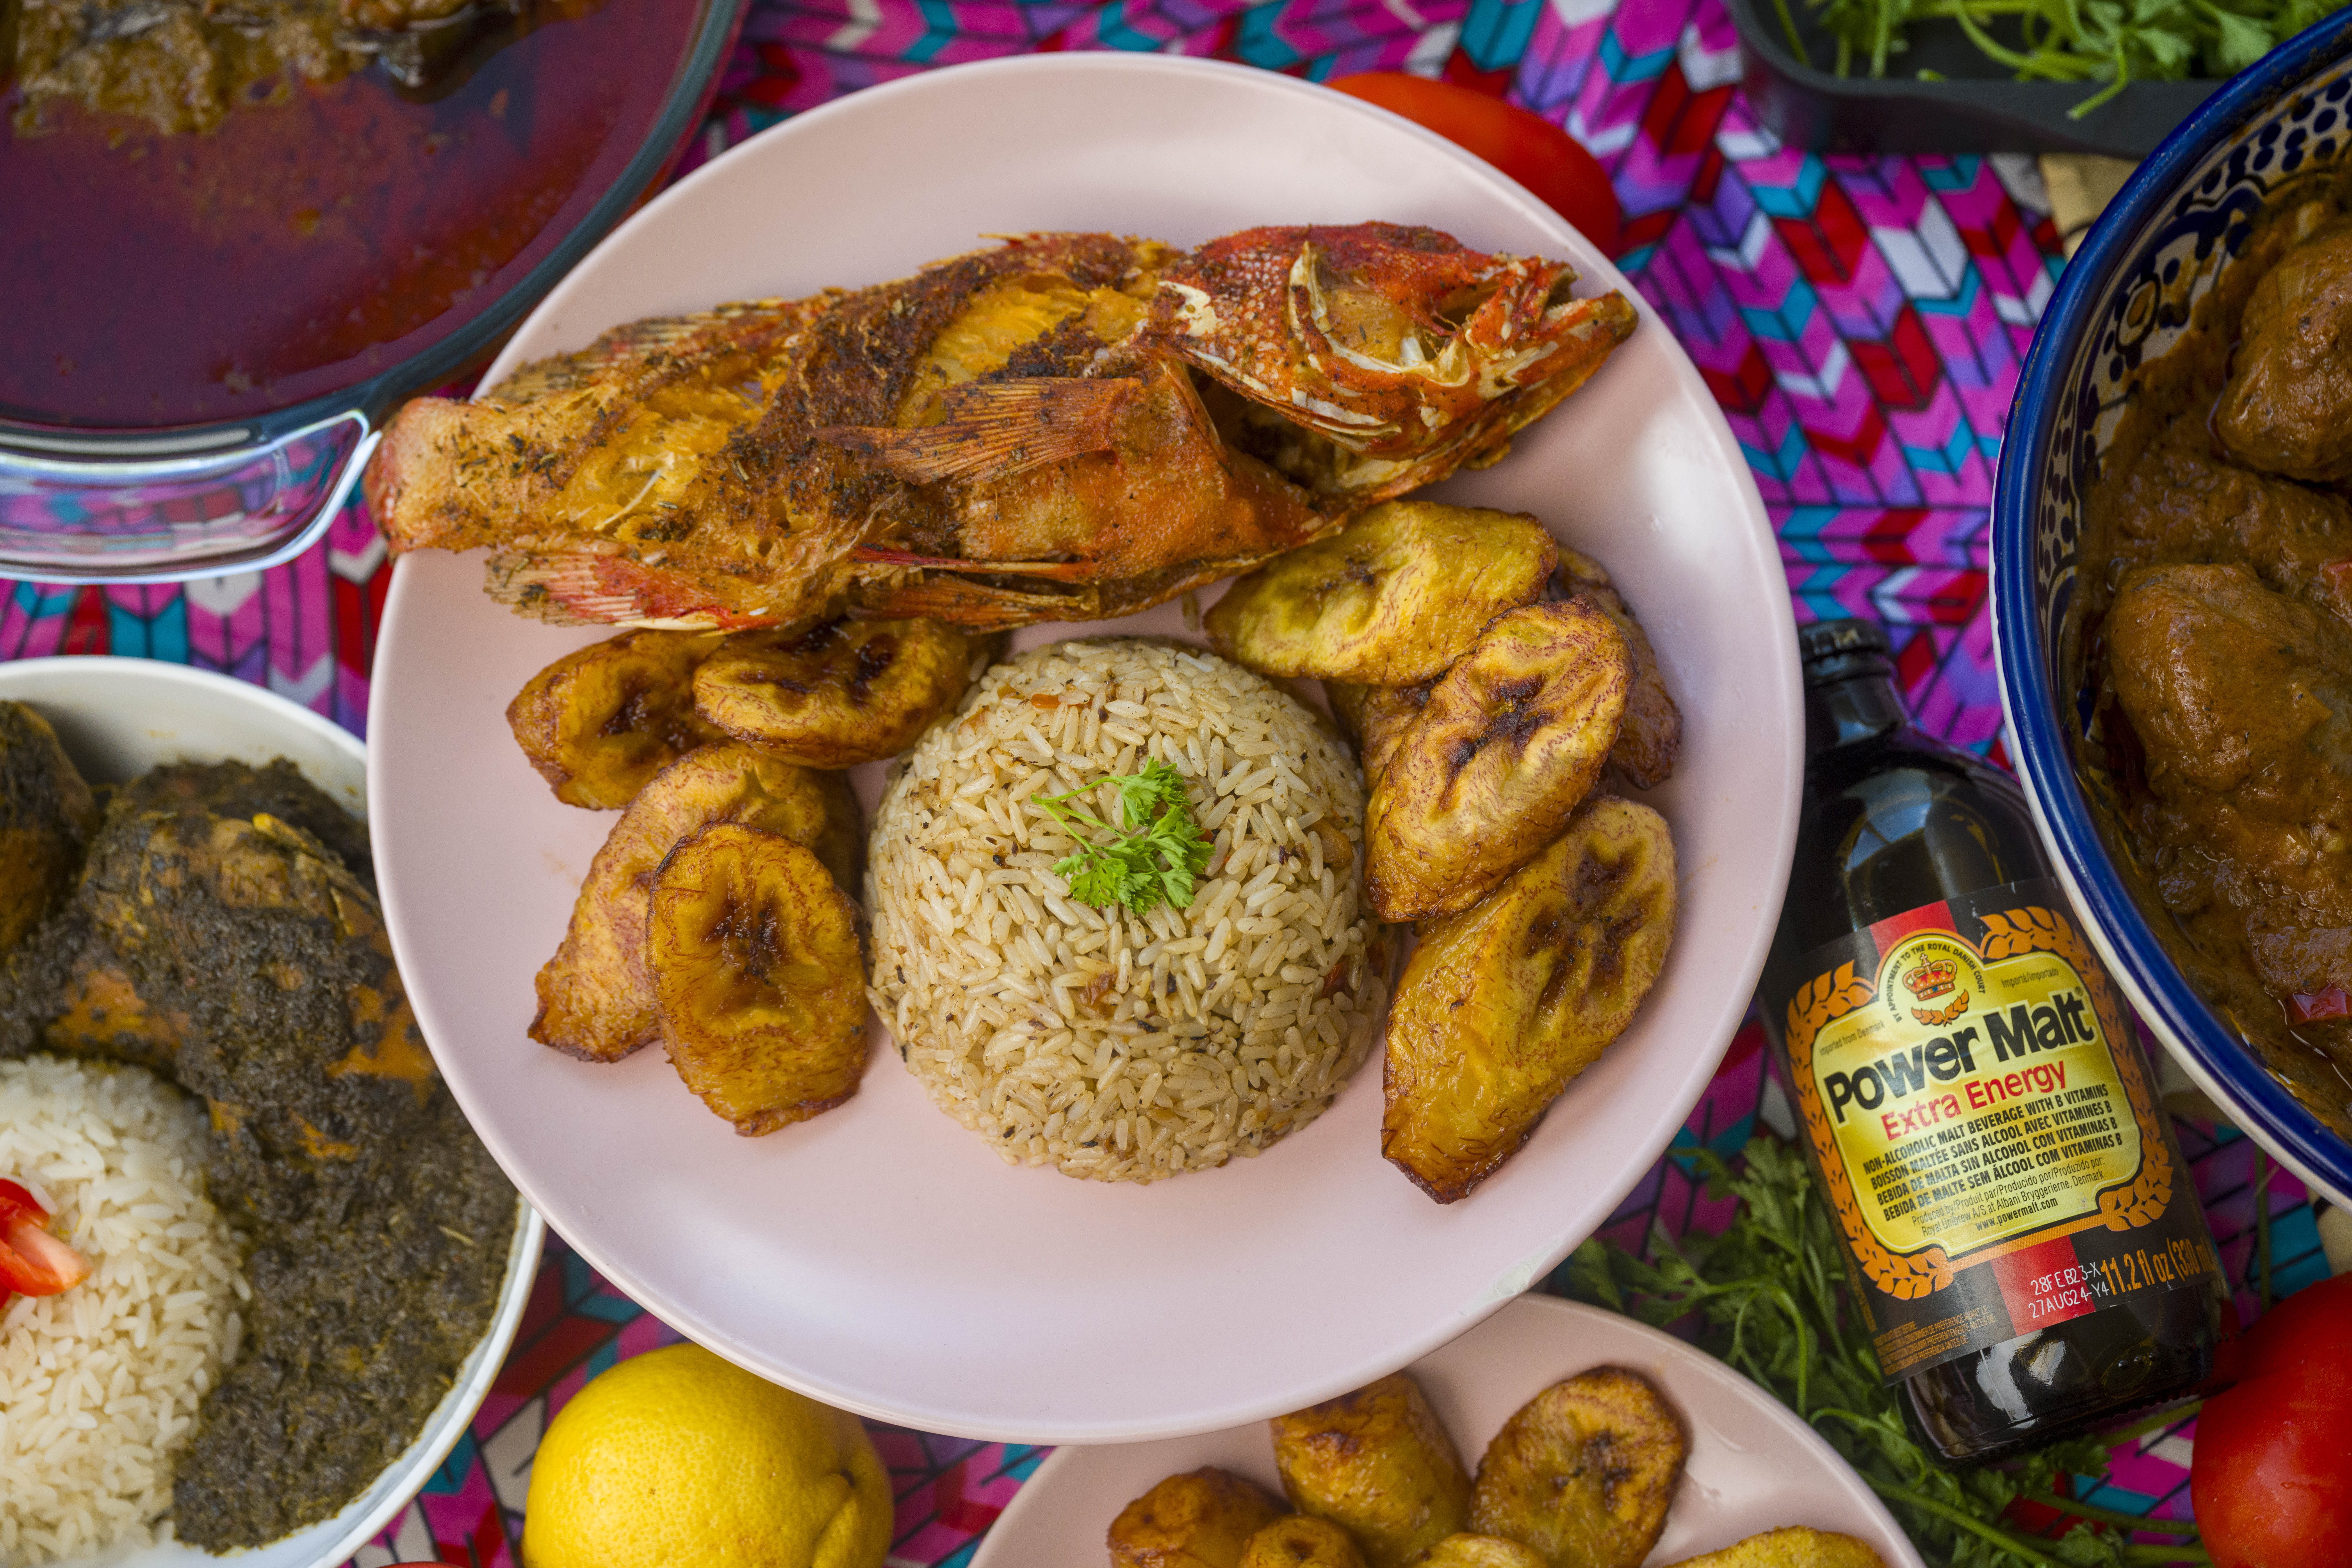 A whole fried fish with plantains and rice on the side on a round plate surrounded by other dishes set on a multi-colored table cloth.